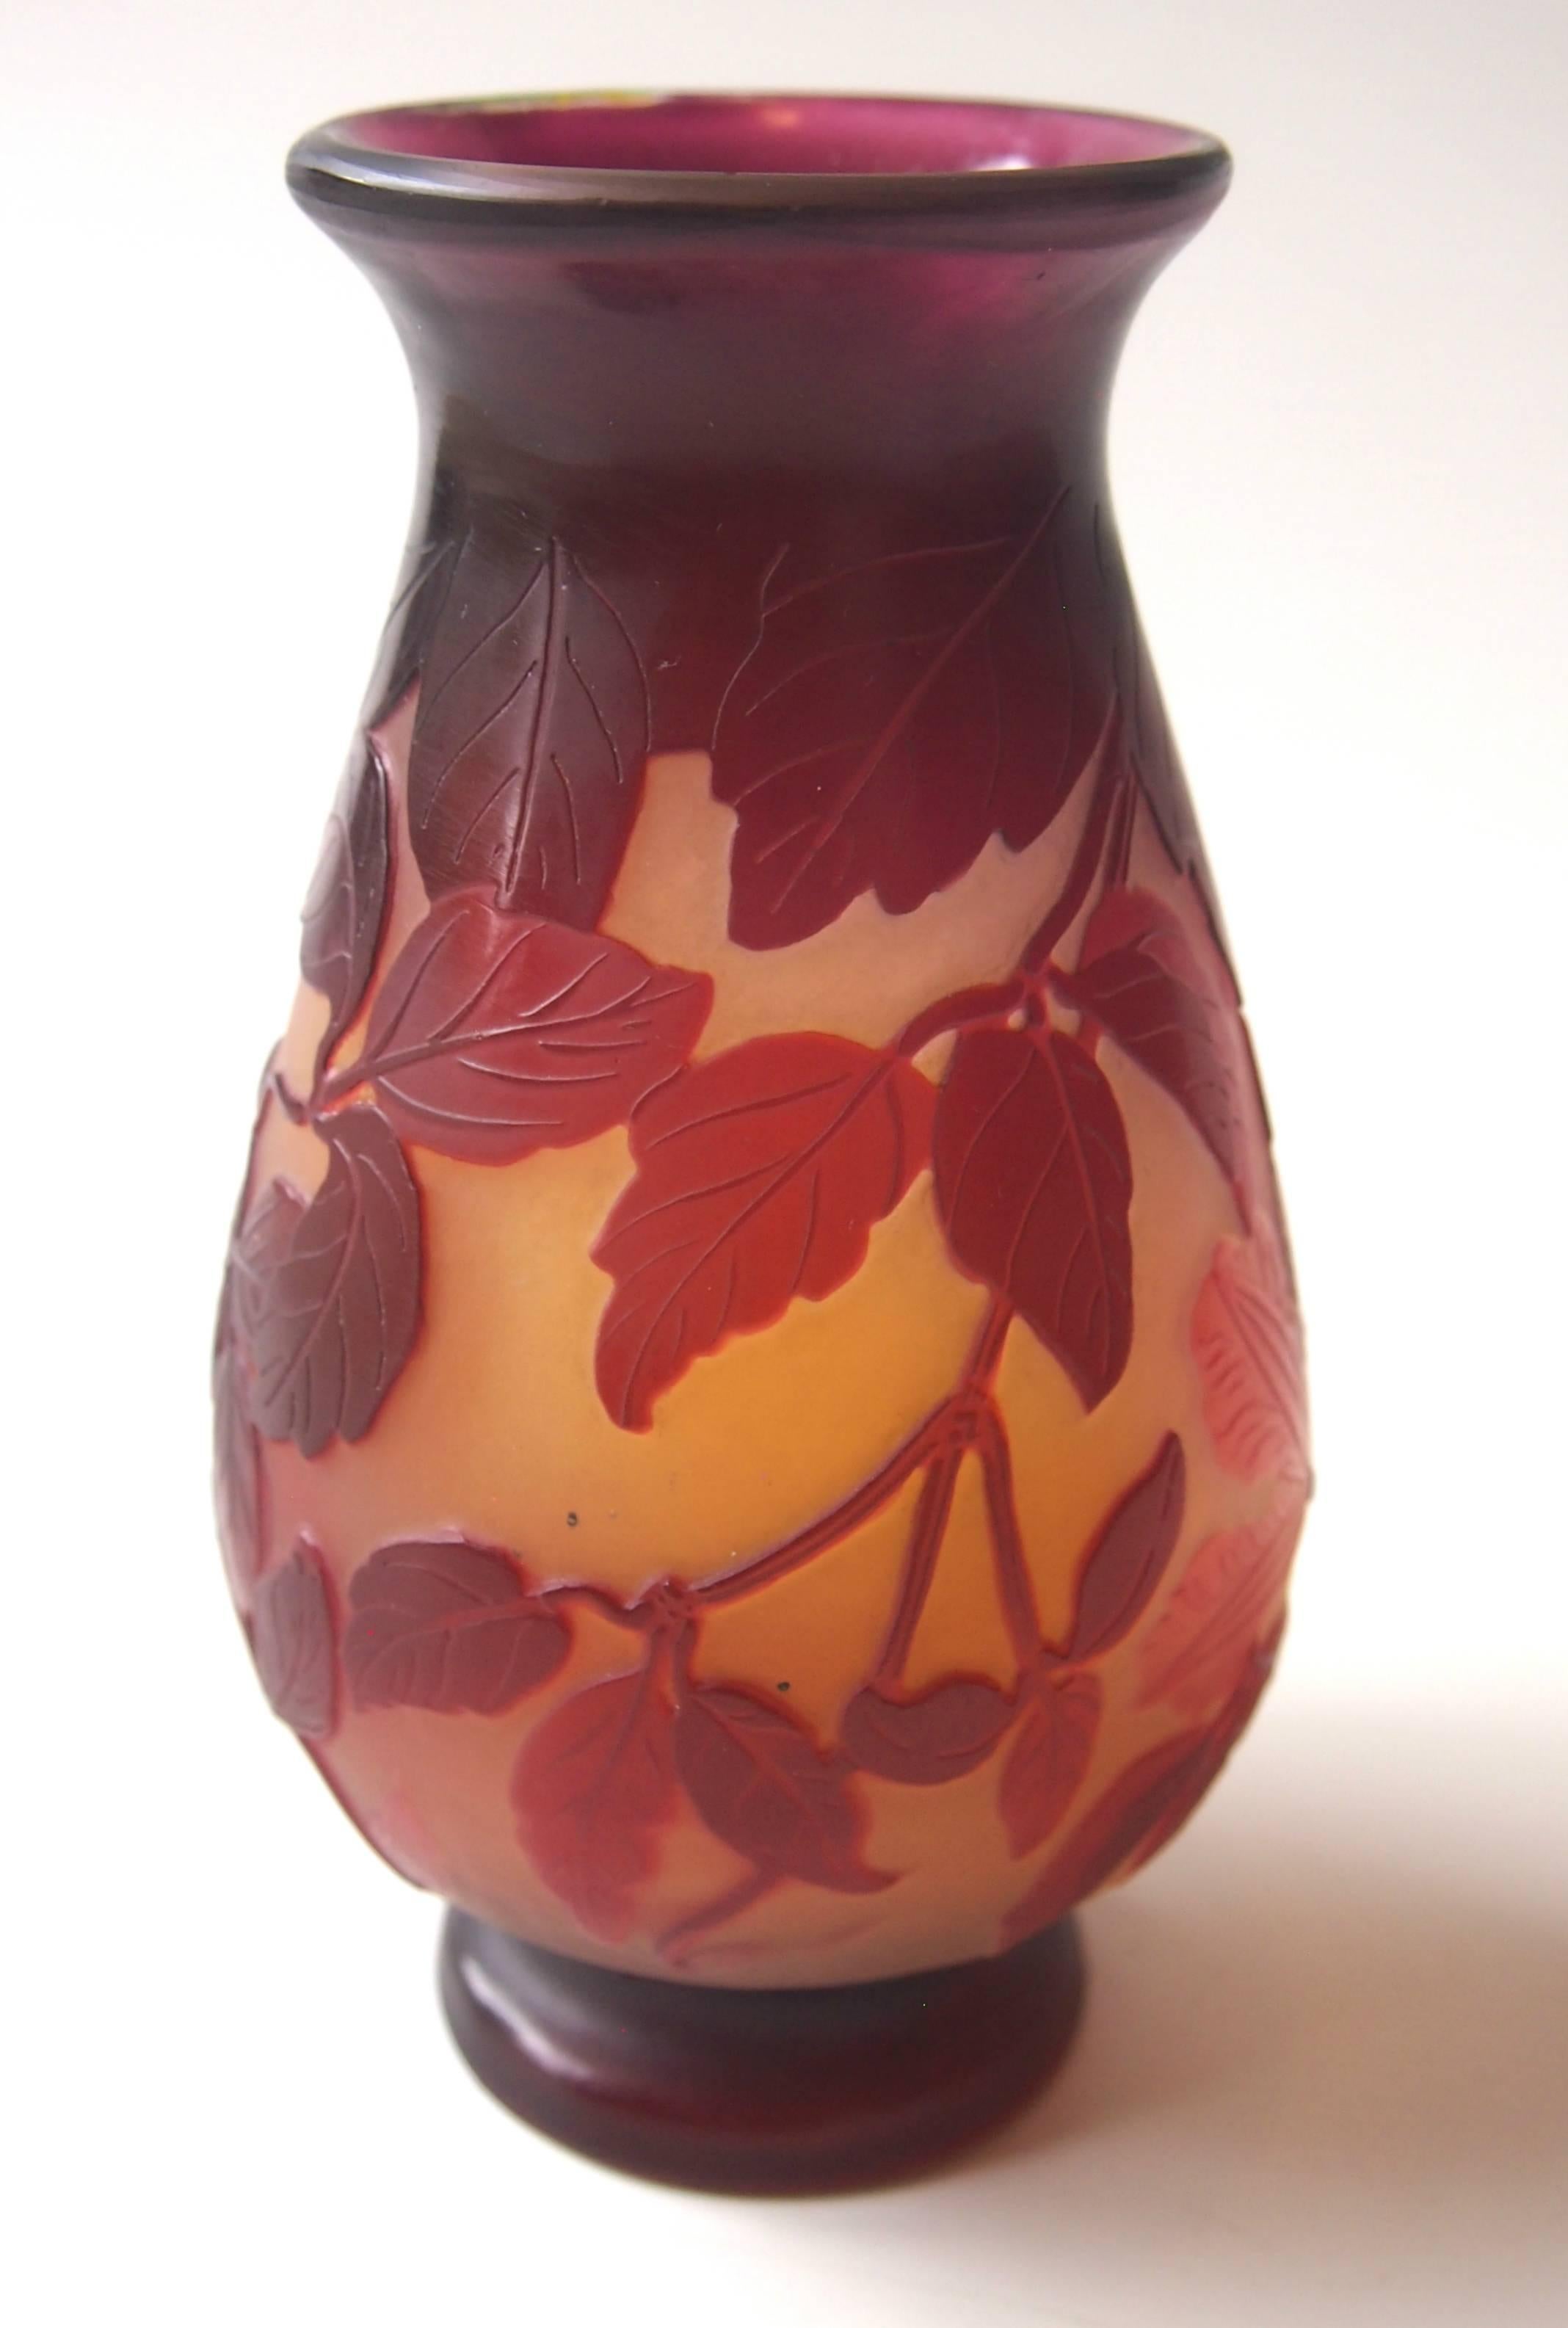 Early 20th Century French Emile Galle Art Nouveau Clematis Cameo Glass Vase 1900 For Sale